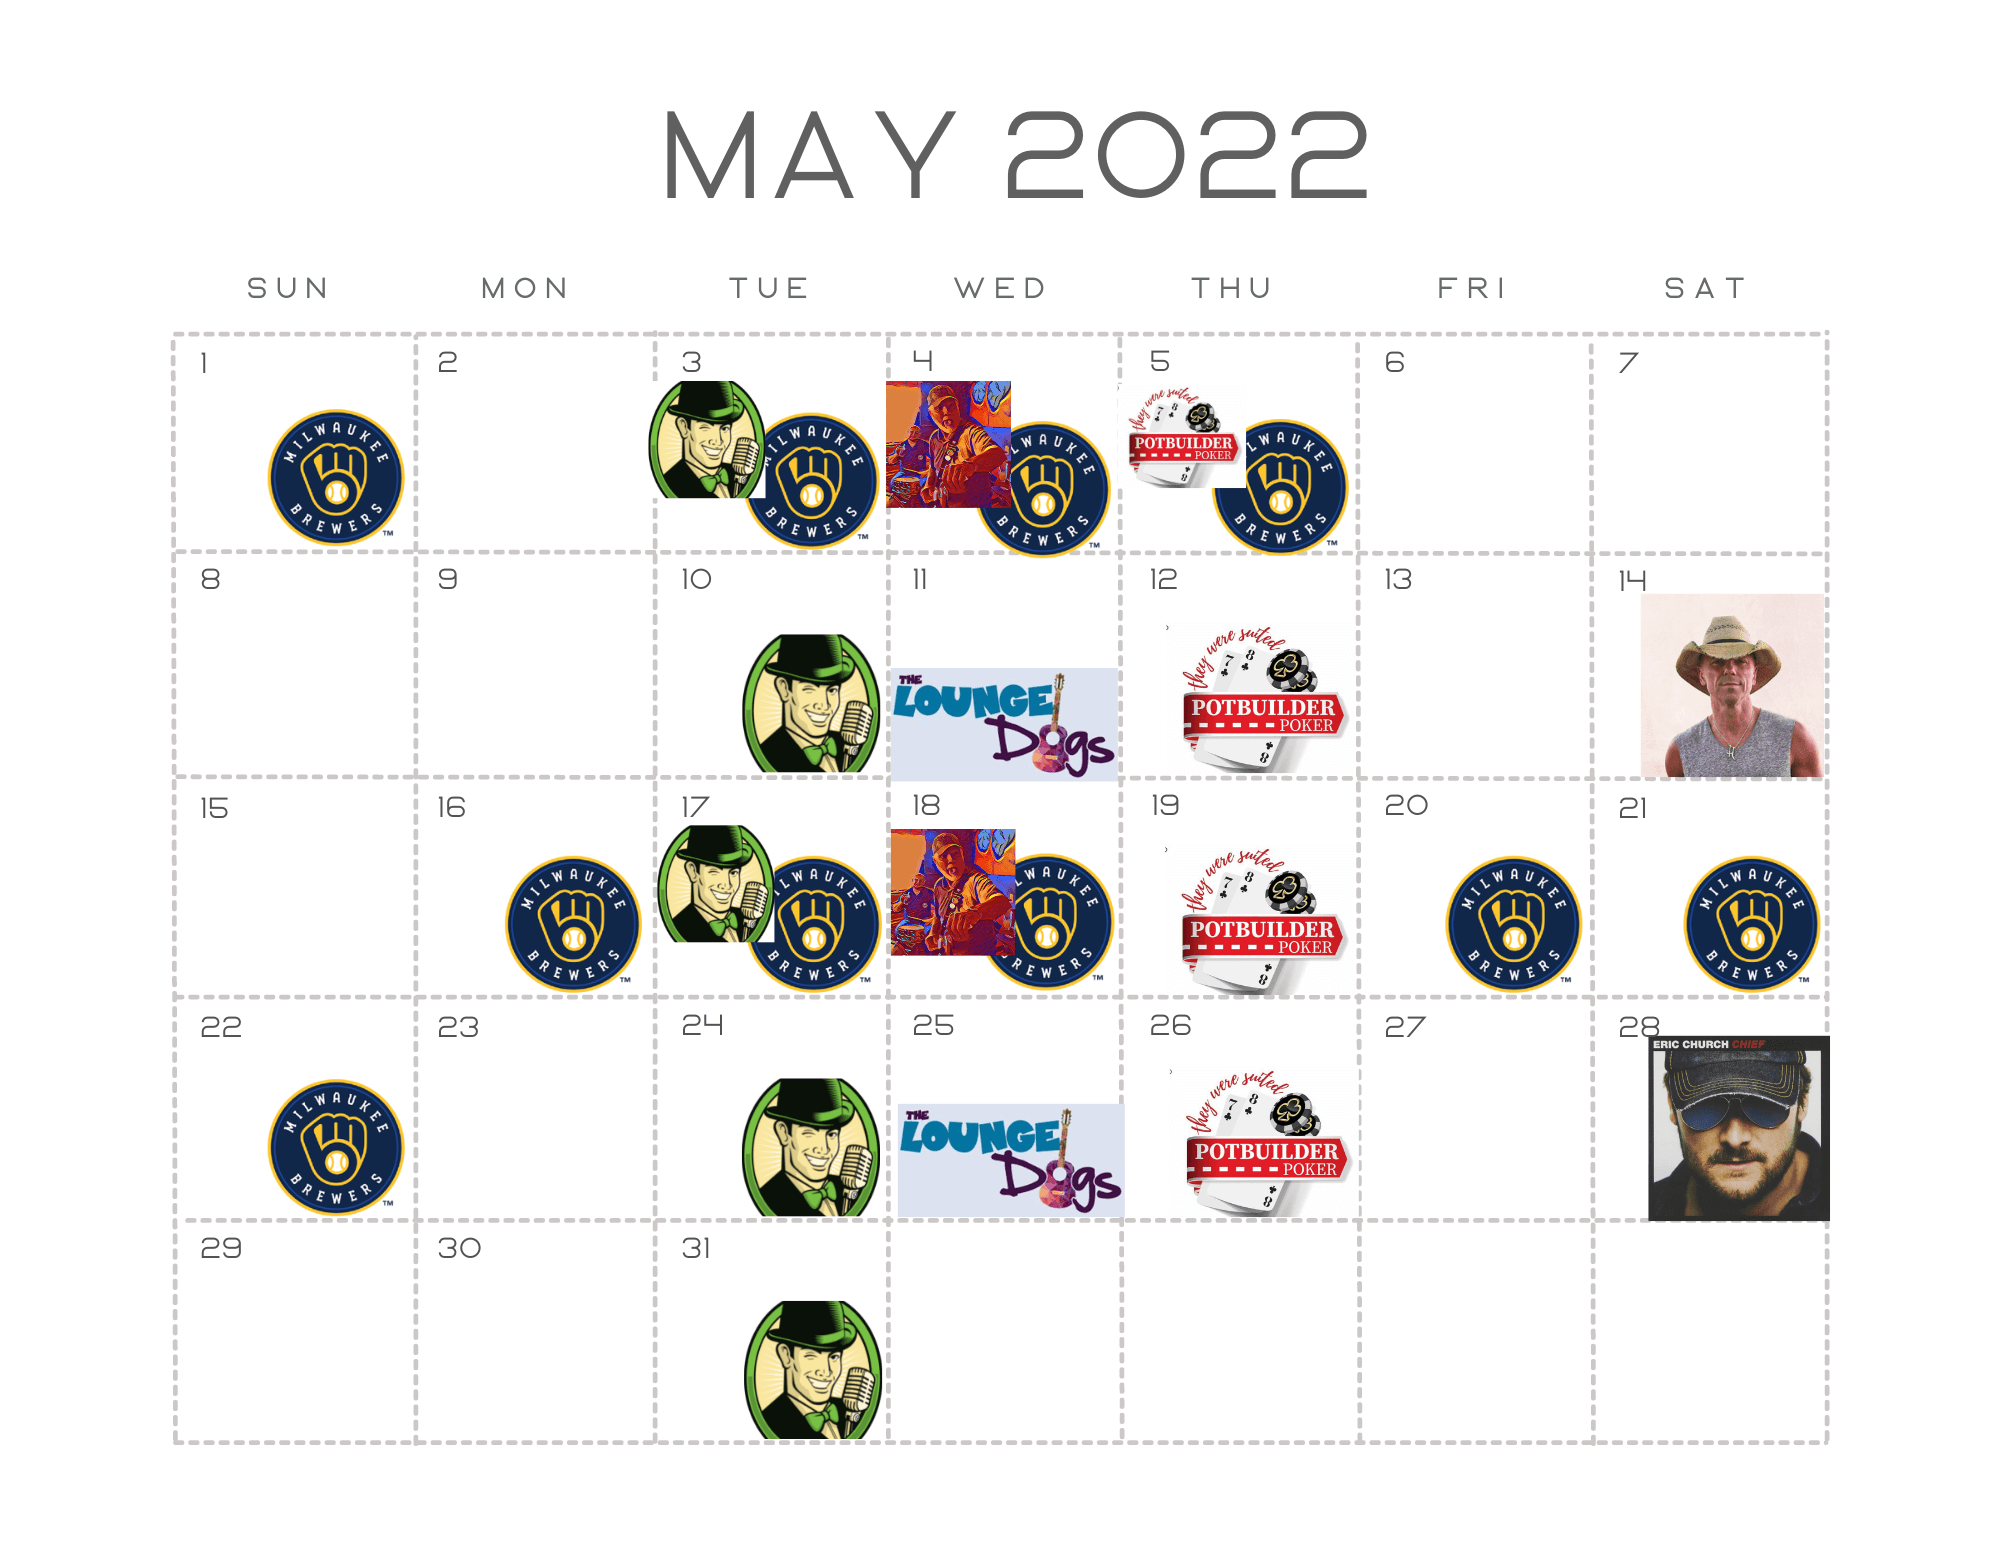 Events Calendar for May 2022